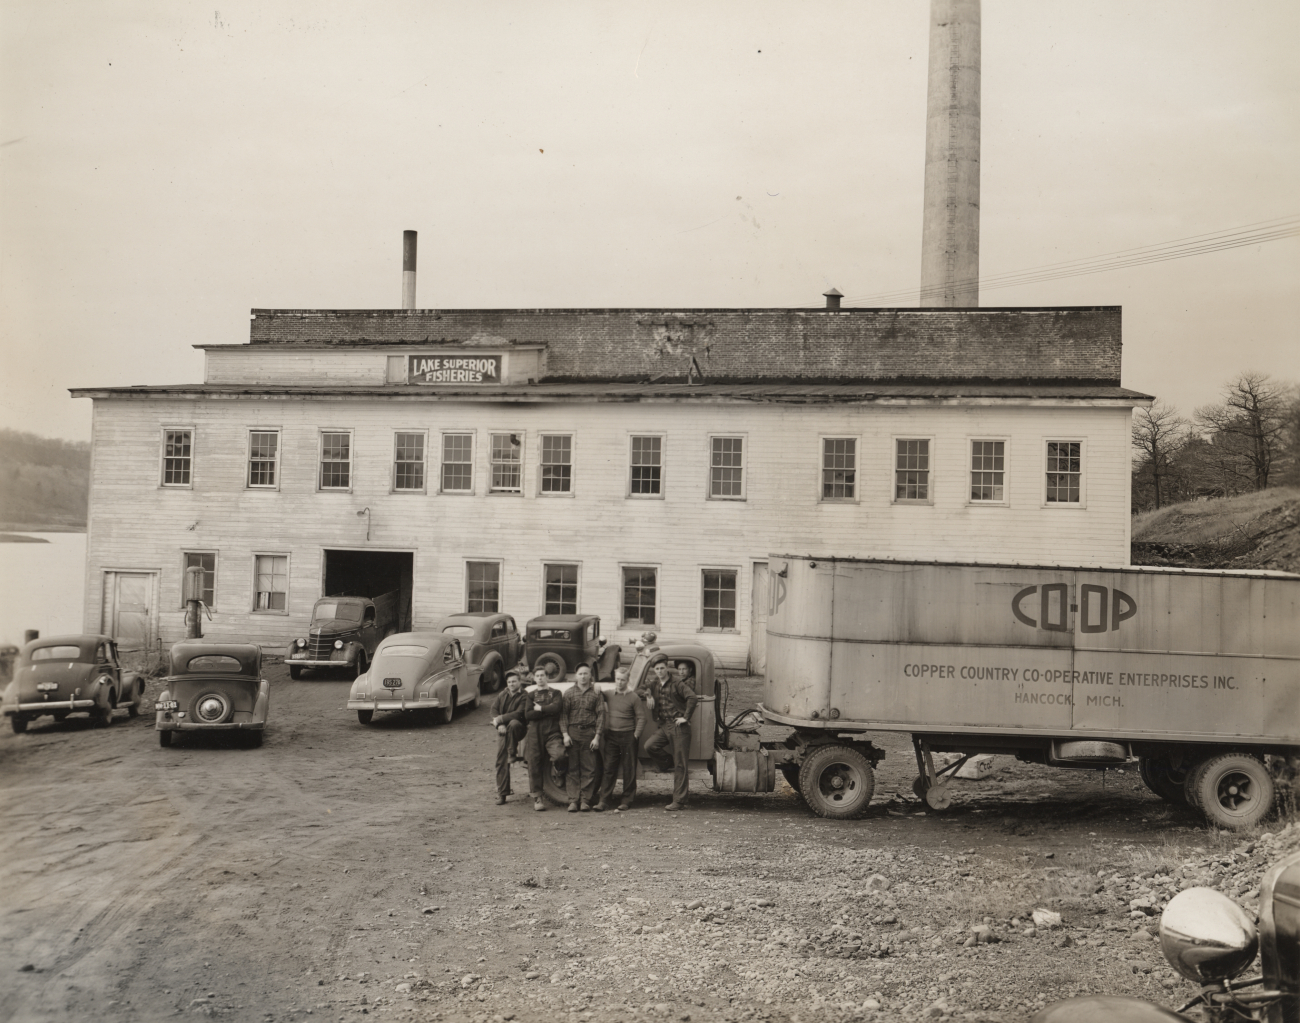 Exterior of the Lake Superior Fisheries packing plant